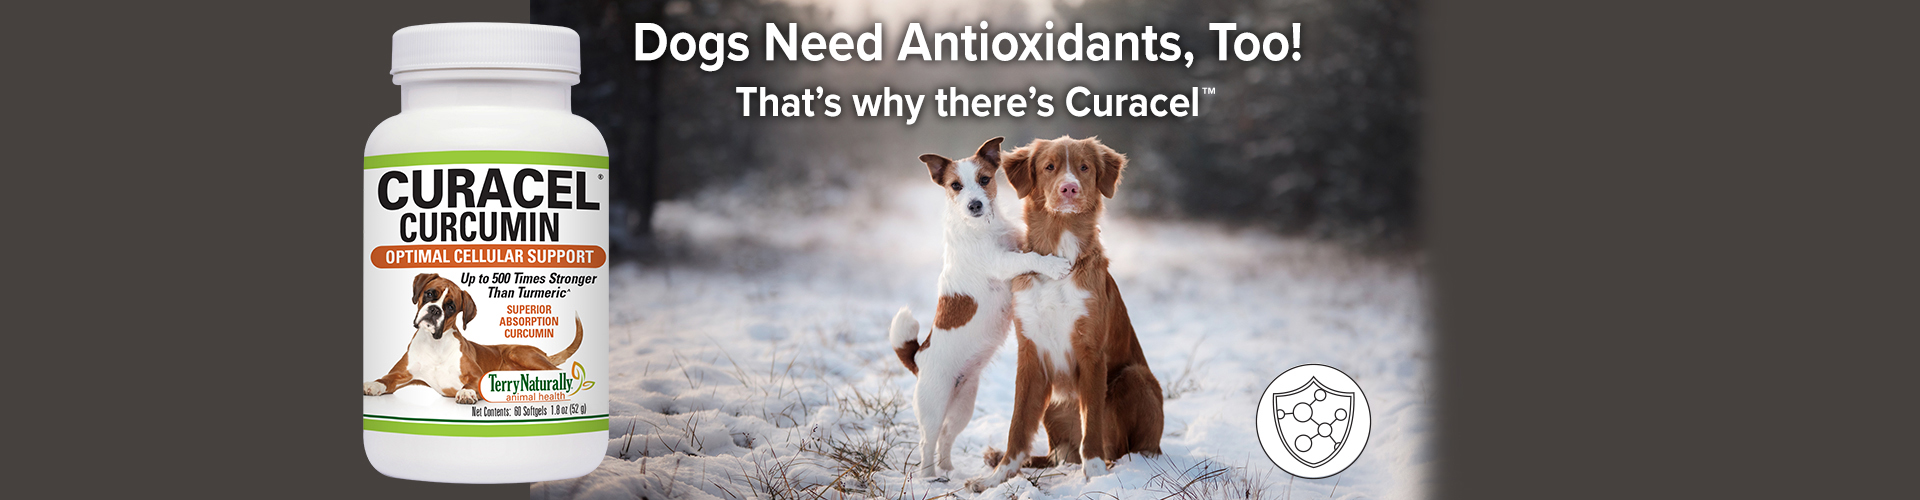 Dogs Need Antioxidants, too! That's why there's Curacel™